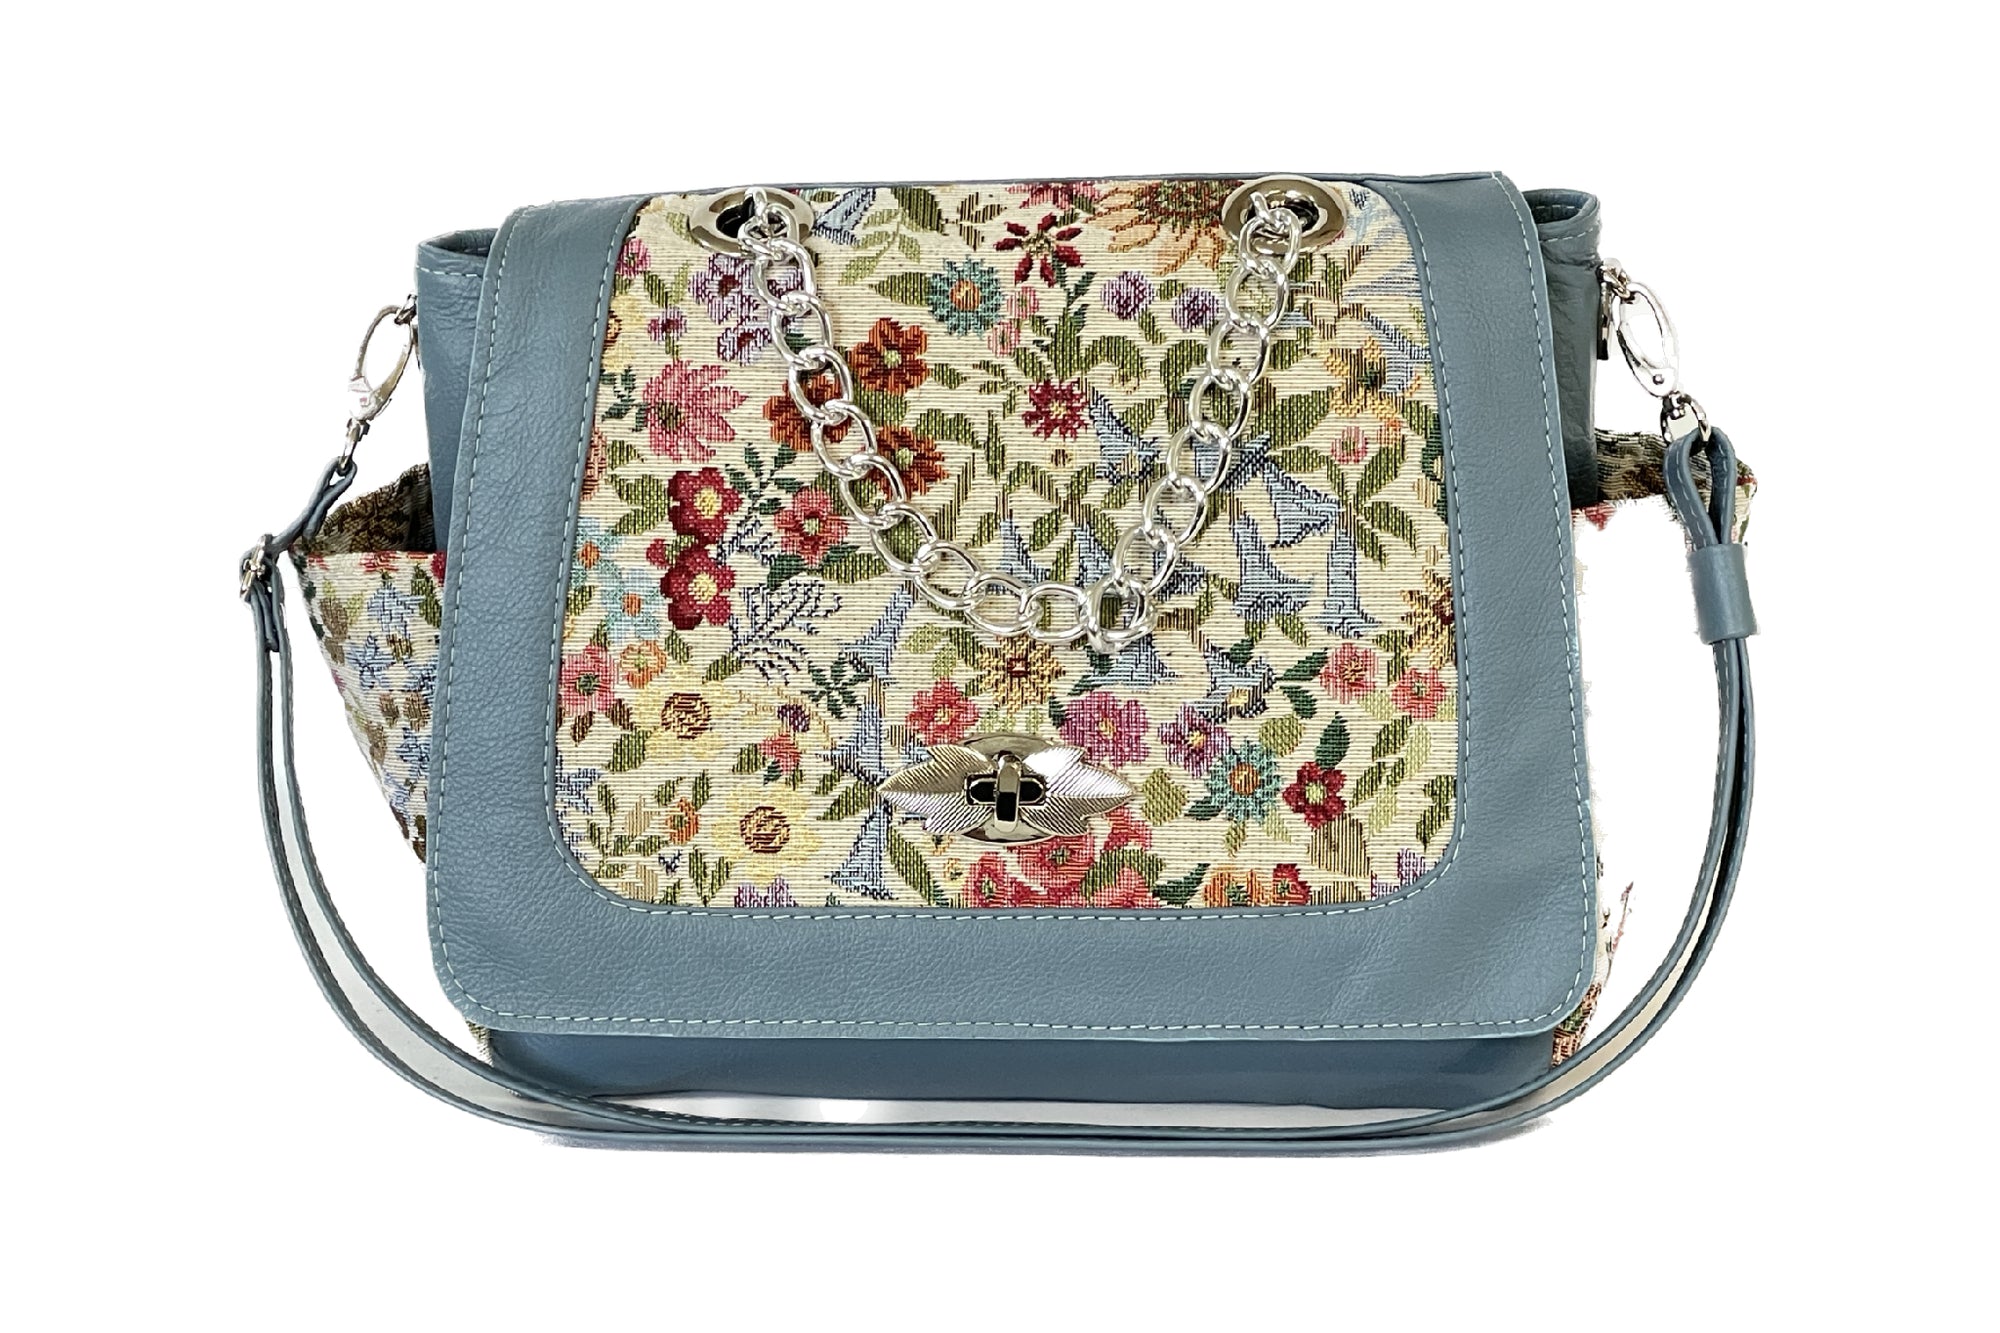 Blue Leather and Floral Tapestry Top Handle Flap Bag